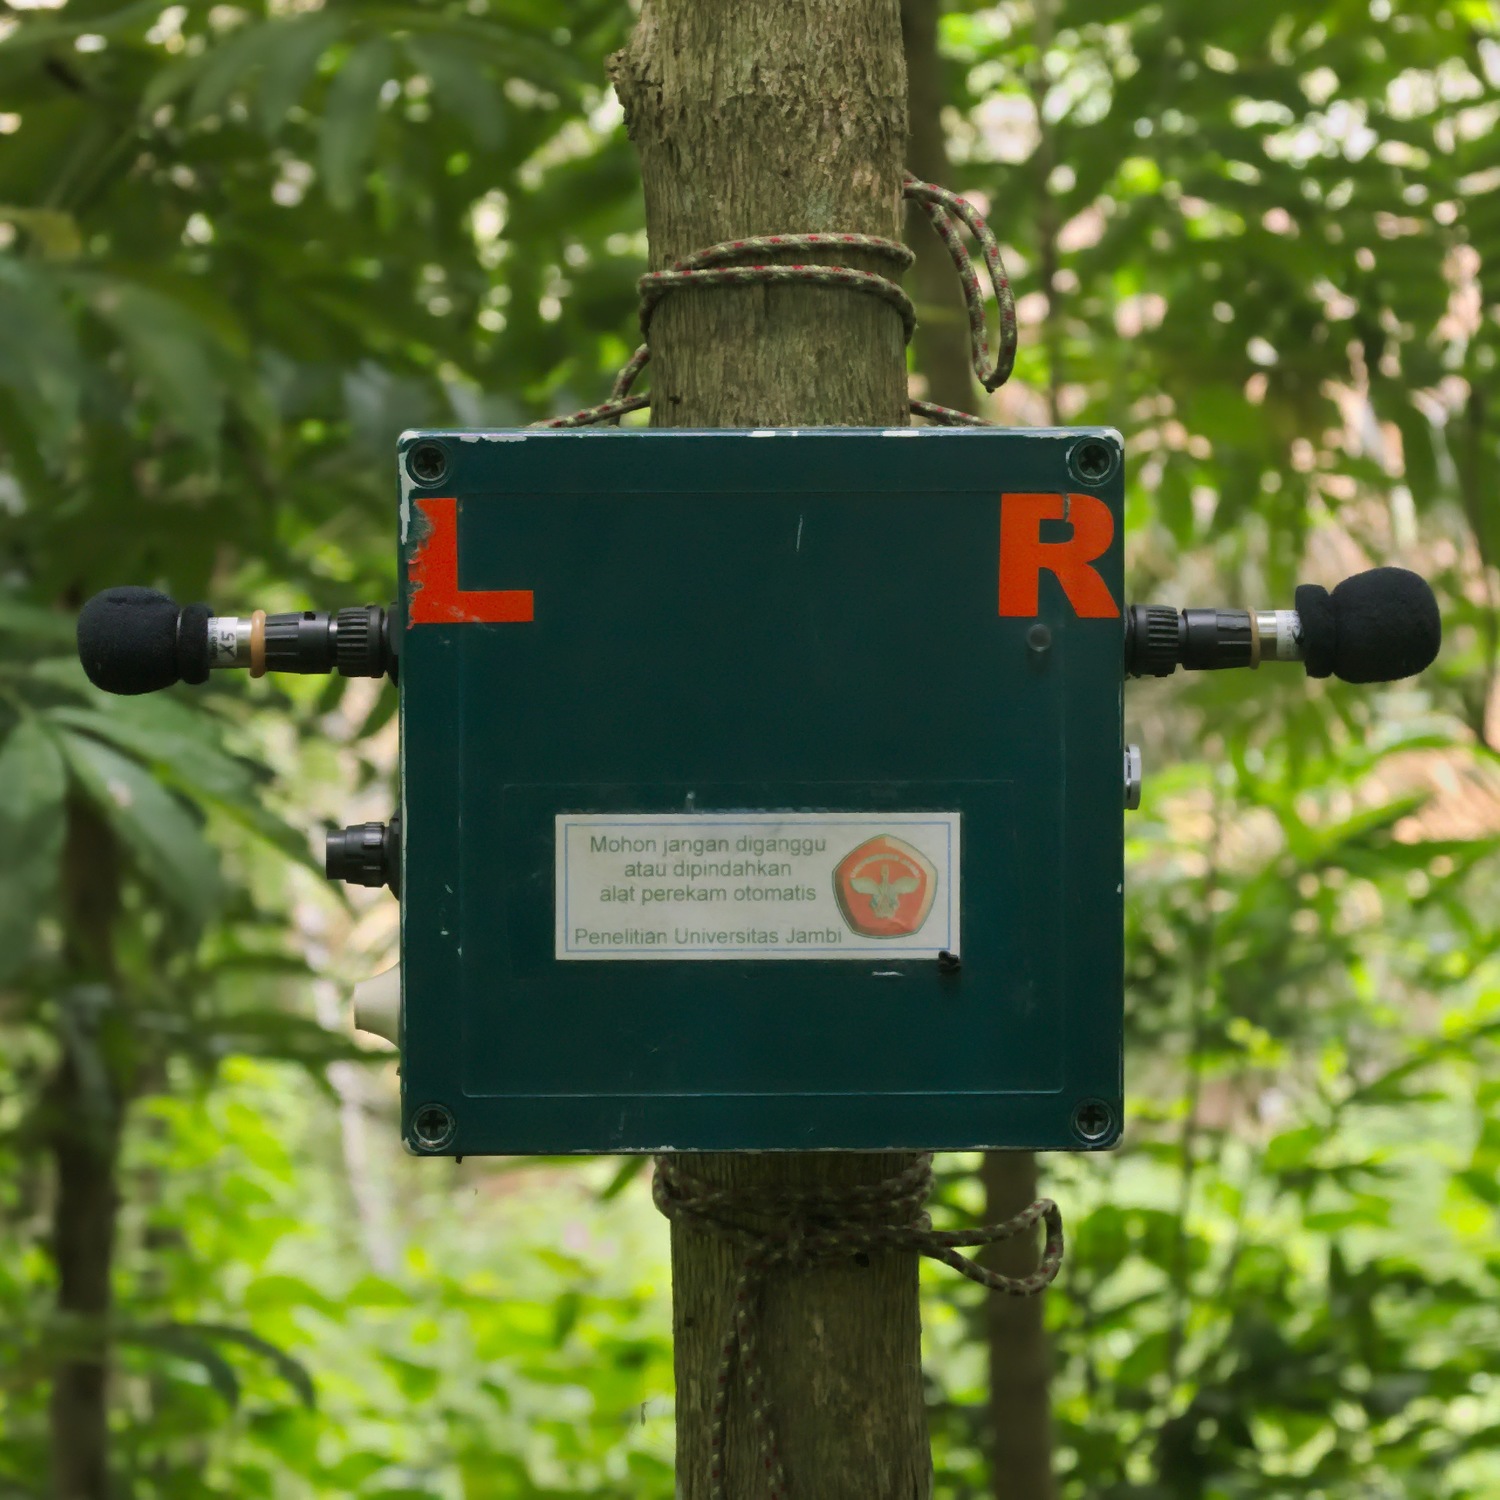 A programmable sound recorder is used in Jambi, Indonesia, to record biodiversity.